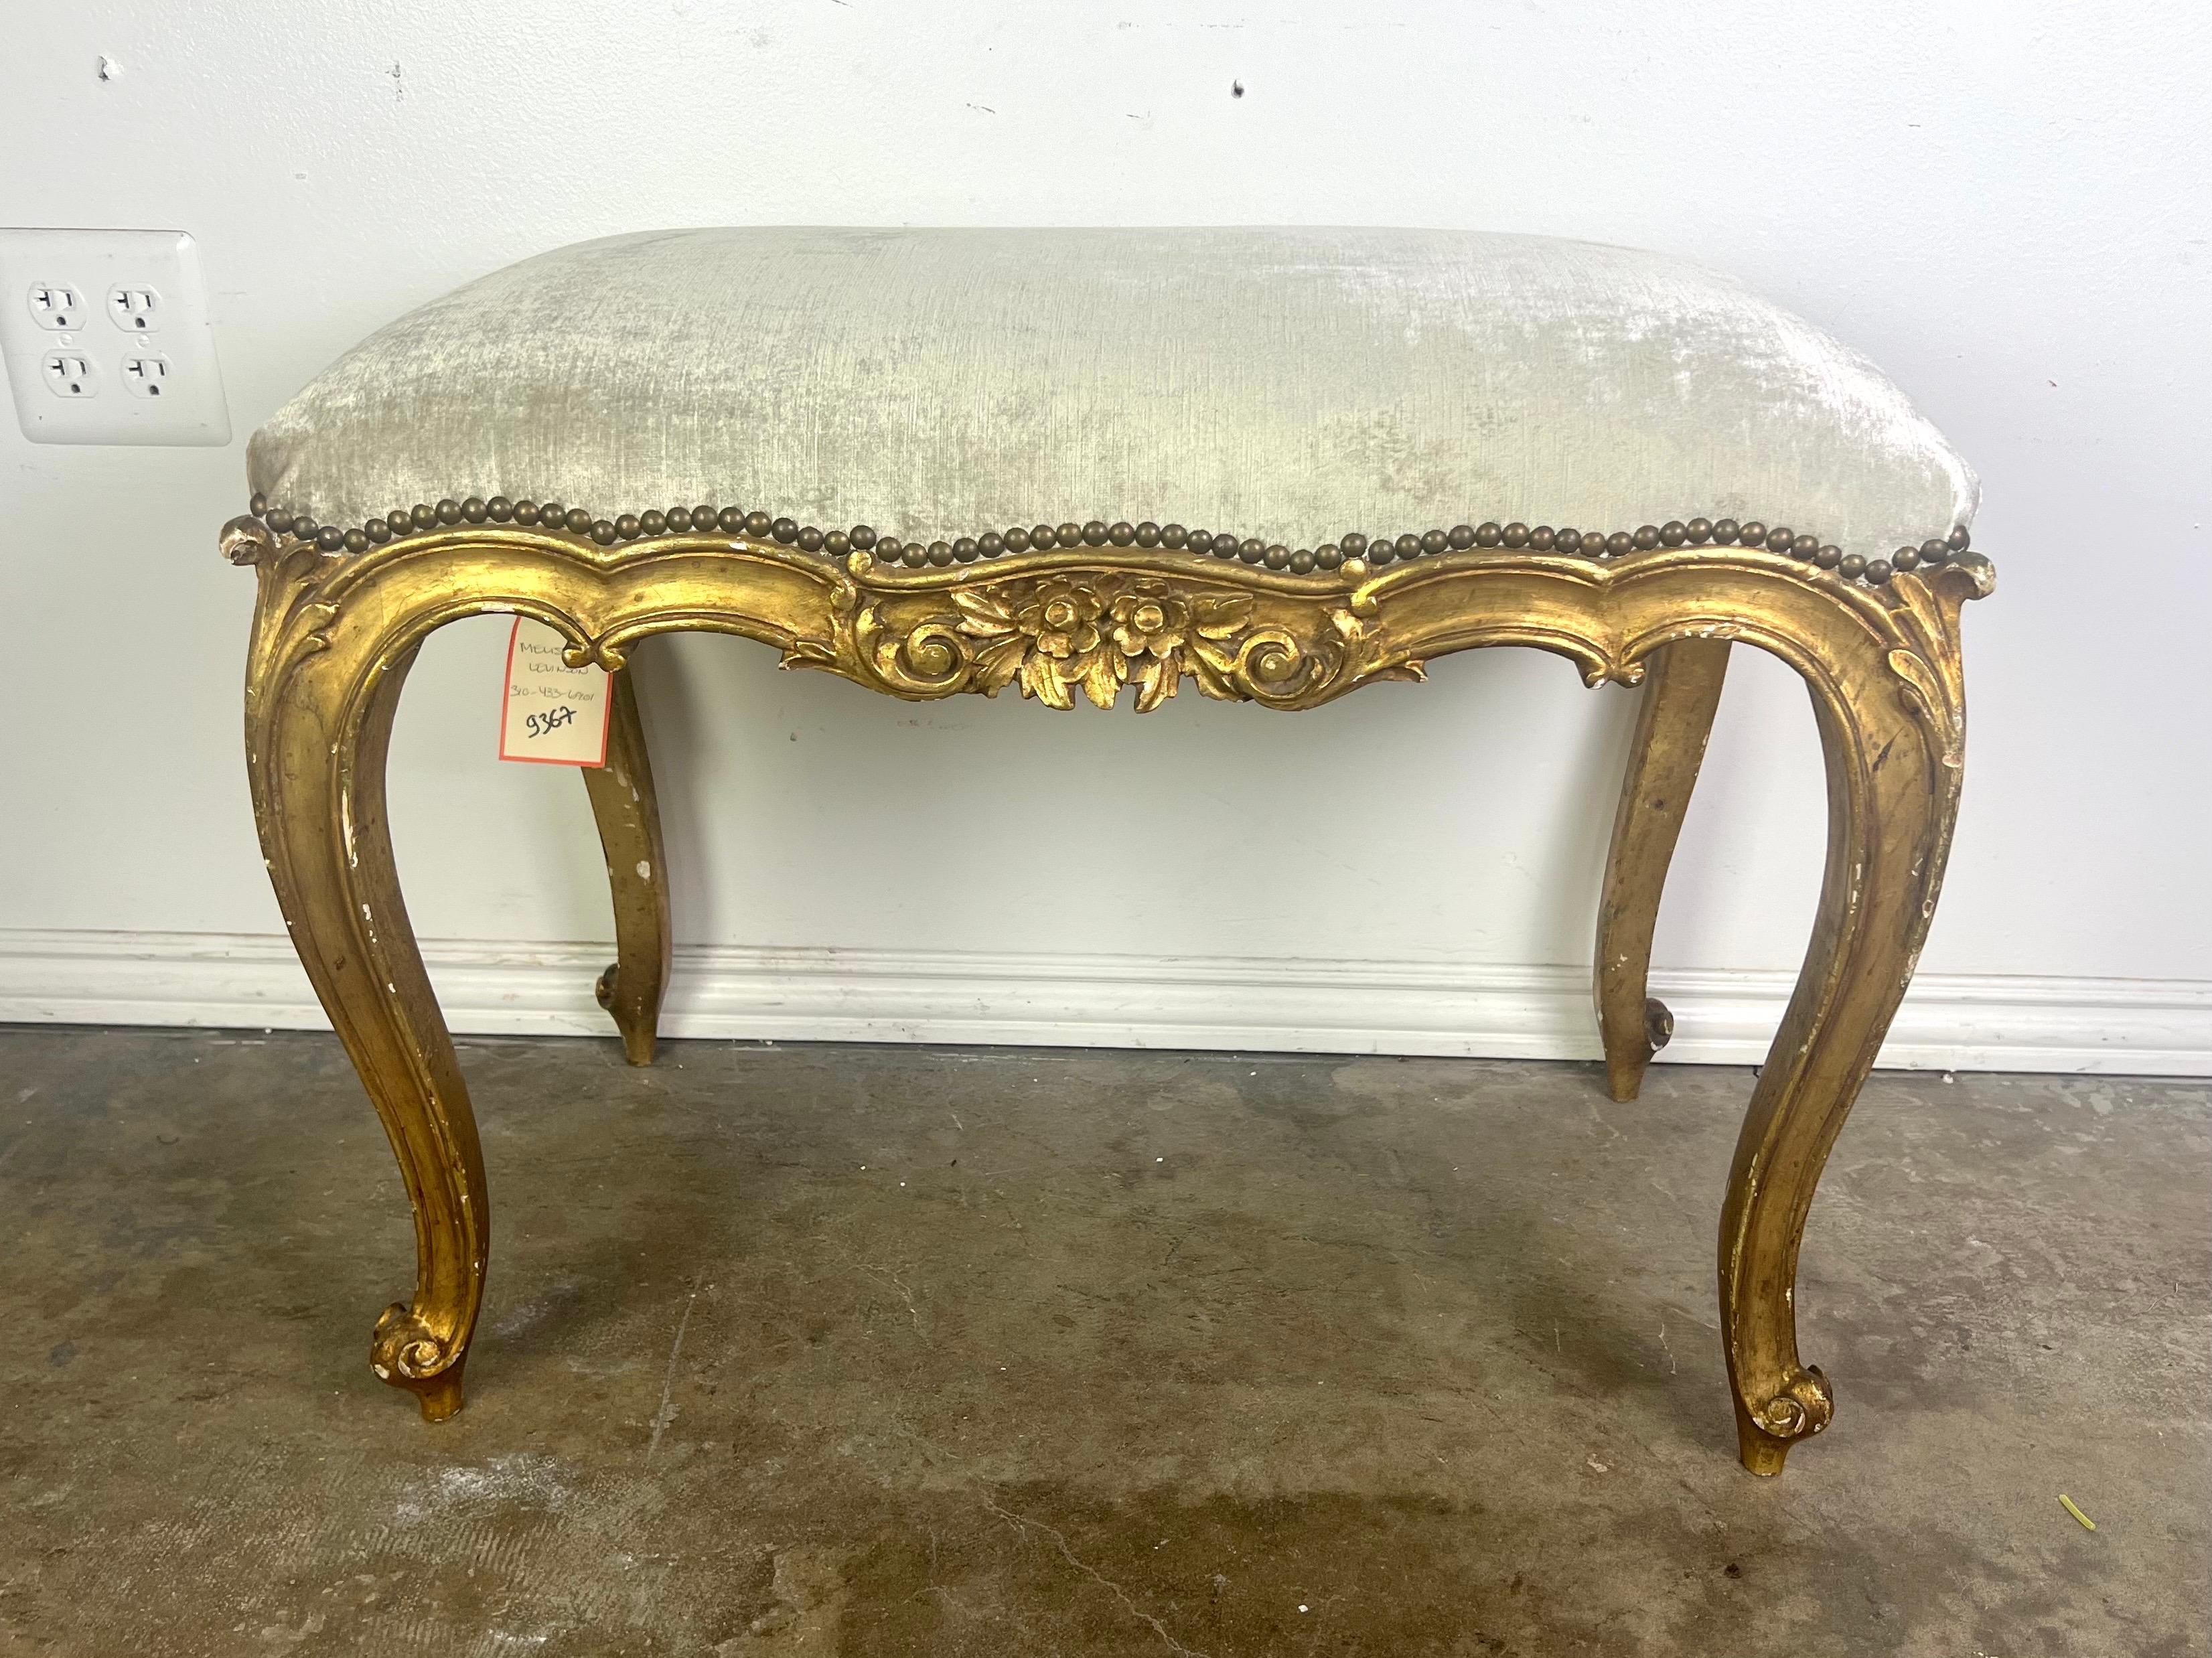 This bench is an elegant piece featuring a French inspired design with opulent details.  The frame is crafted from wood with a gold gilt finish that accentuates its ornate carvings and floral motifs, particularly visible along the apron and the